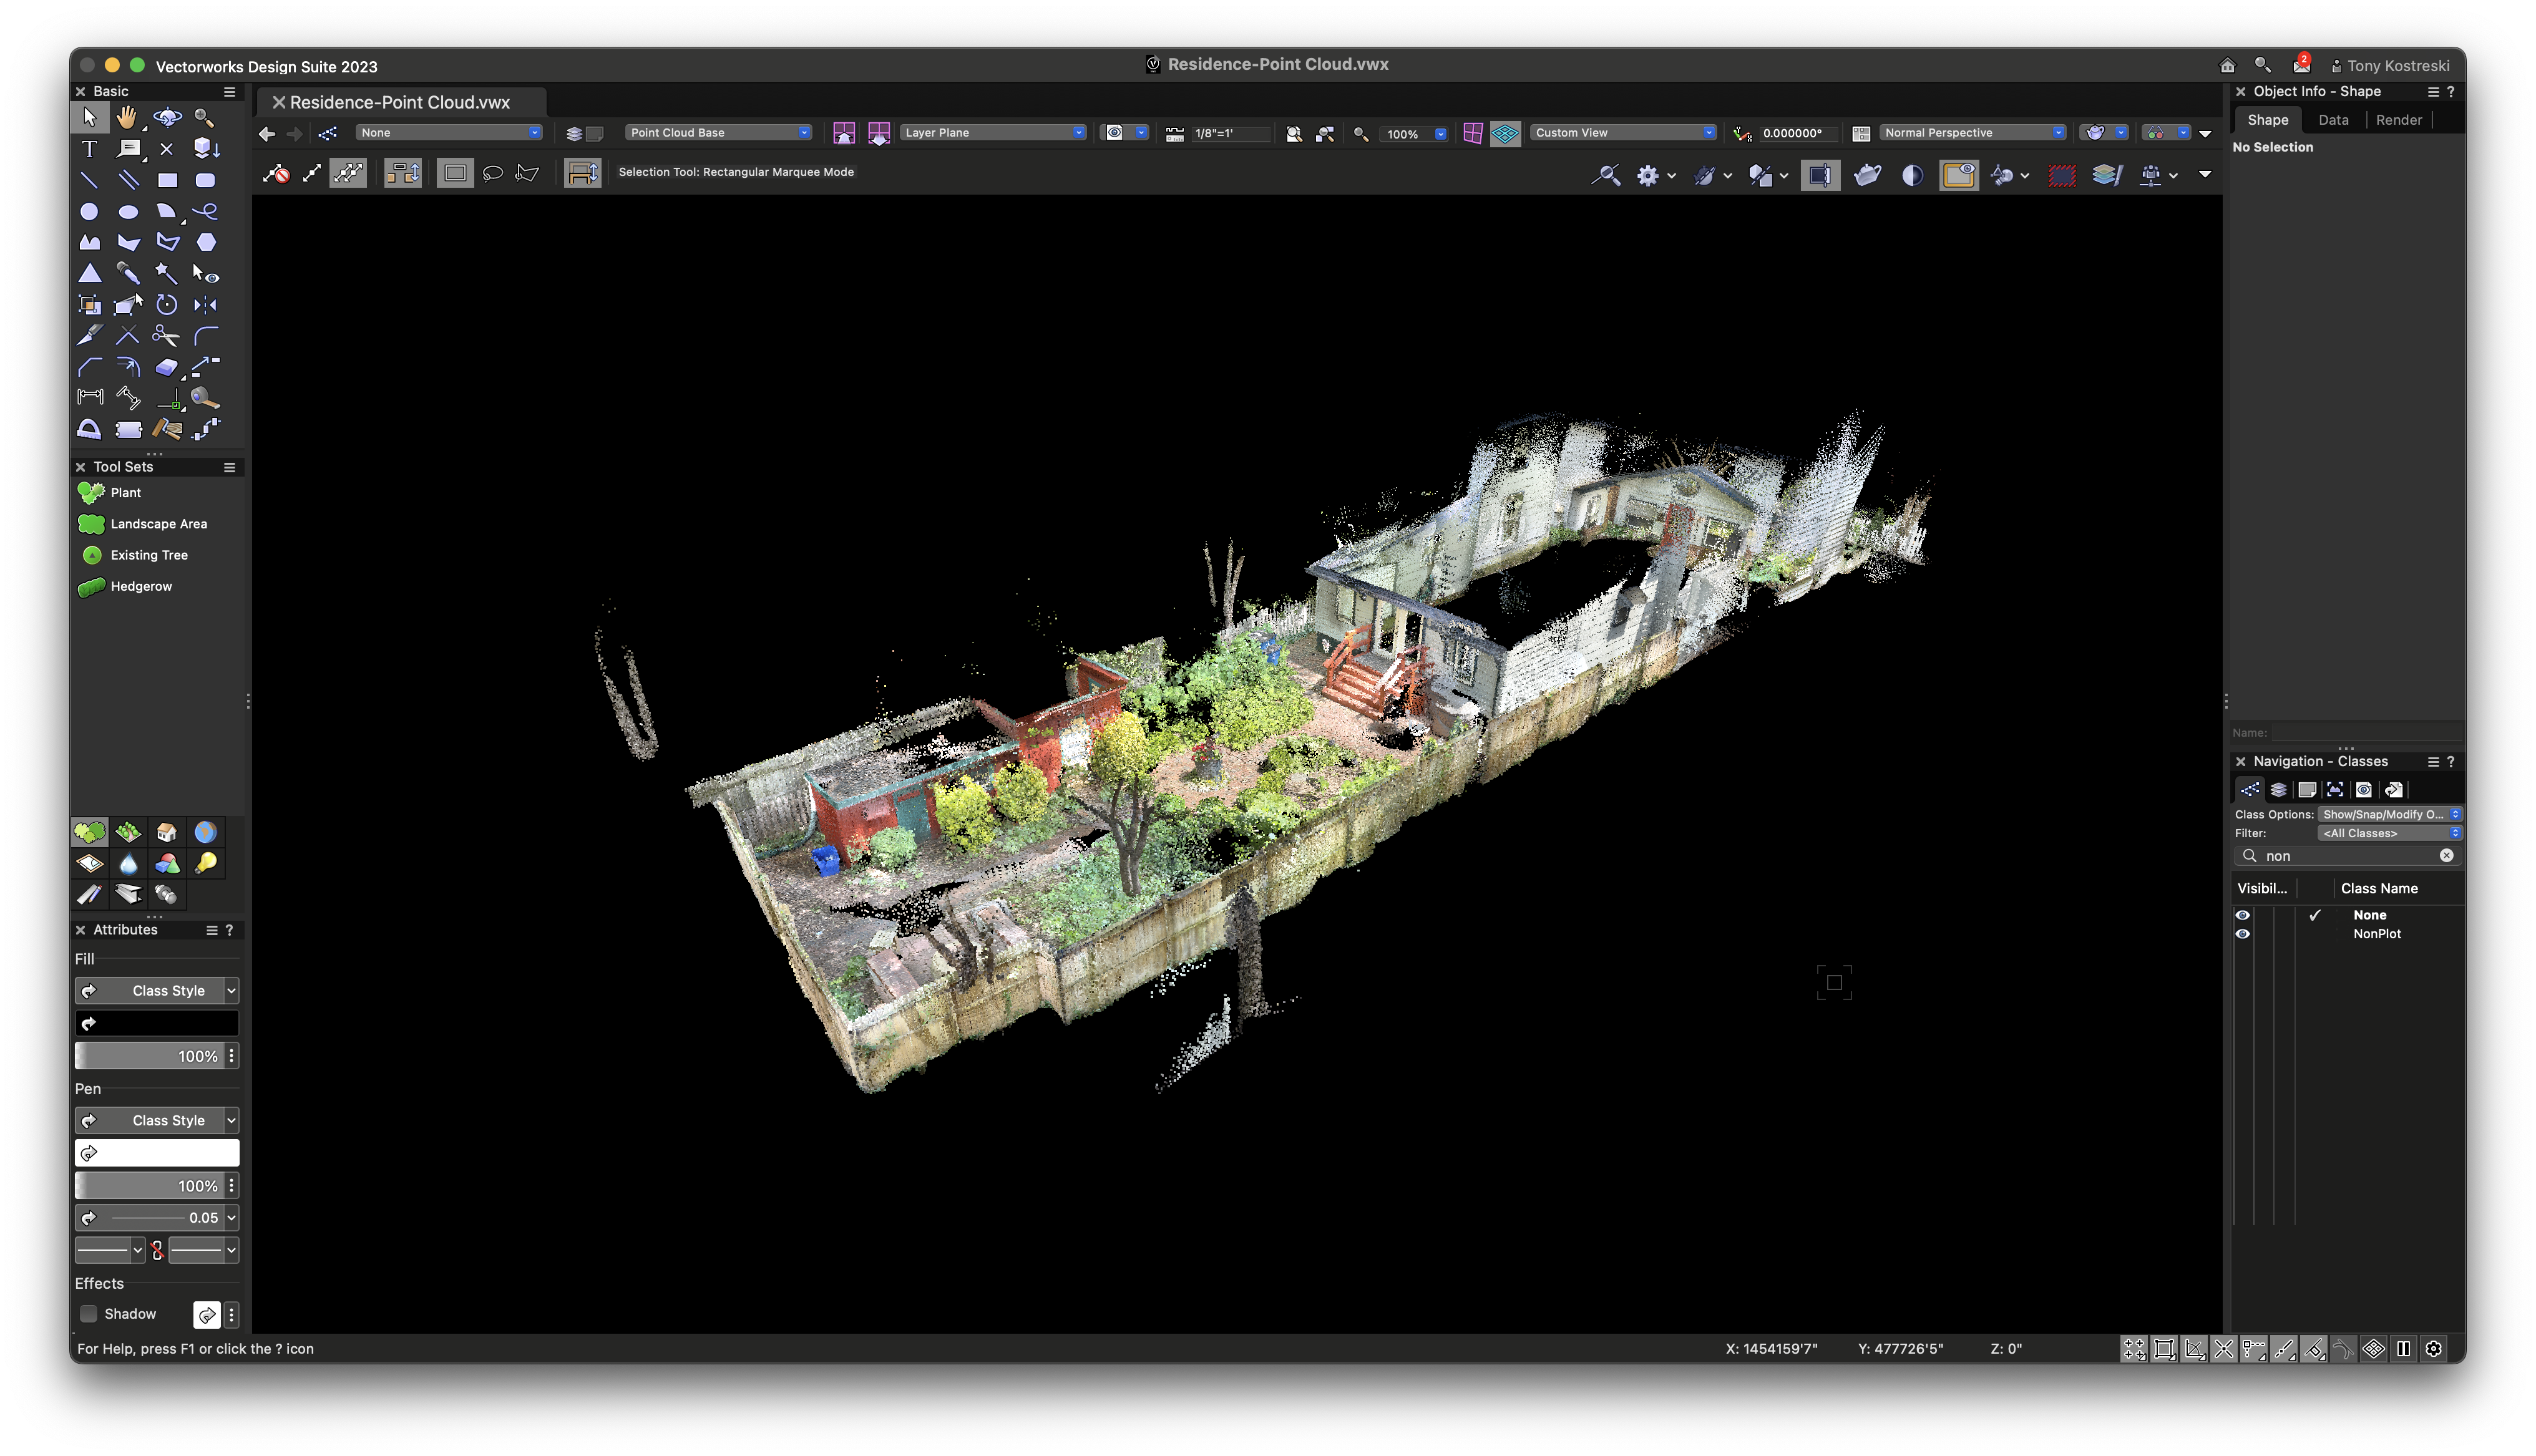 Residence-Point Cloud